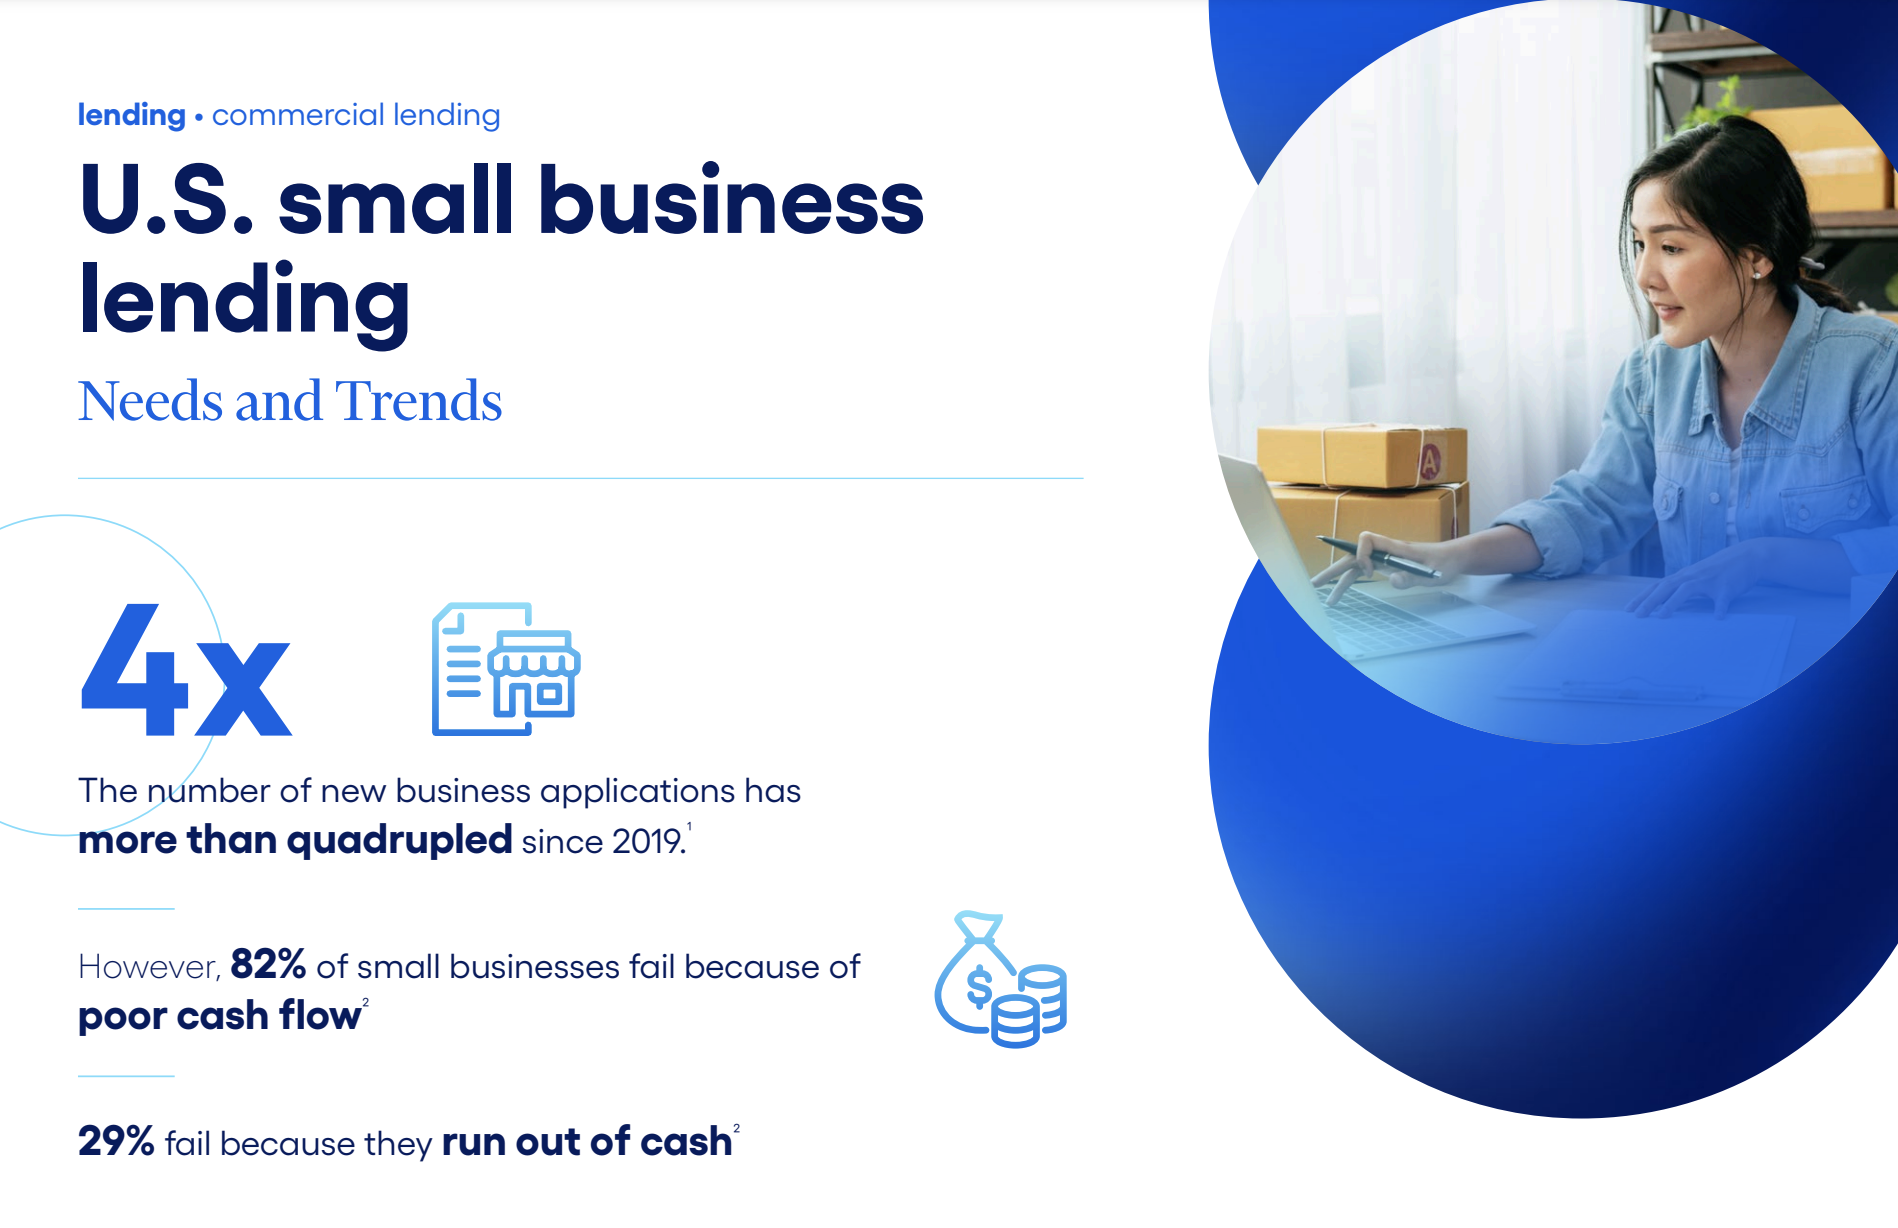 jh-infographic-small-business-lending-needs-and-trends-header-image